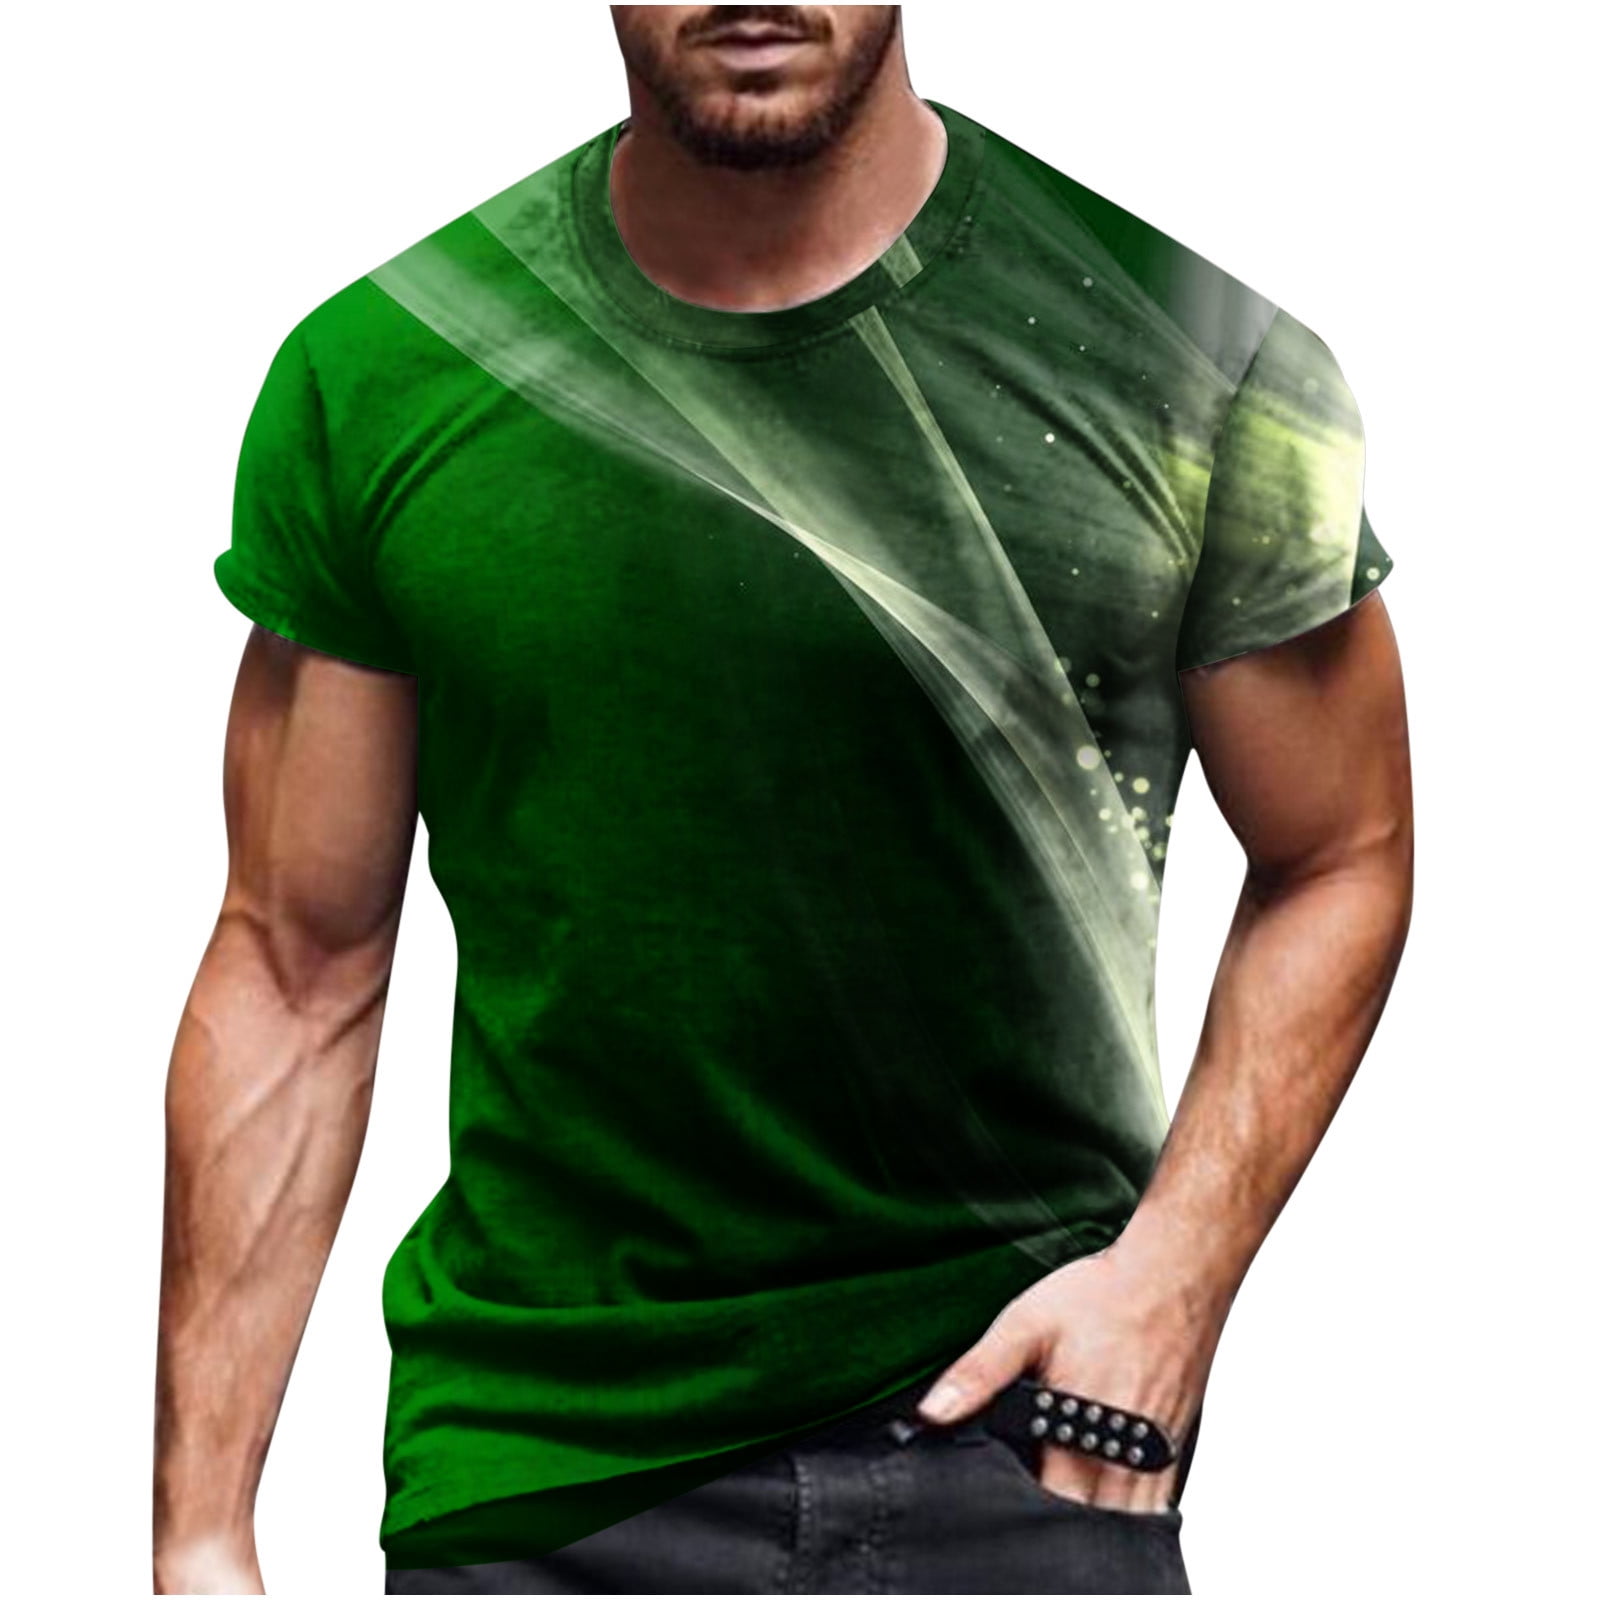 YYDGH Men's 3D Printing T-Shirt Colorful Novelty Graphic Short Sleeve  Crewneck Tee Tops Casual Slim Fit T Shirts(1#Green,XXL) 